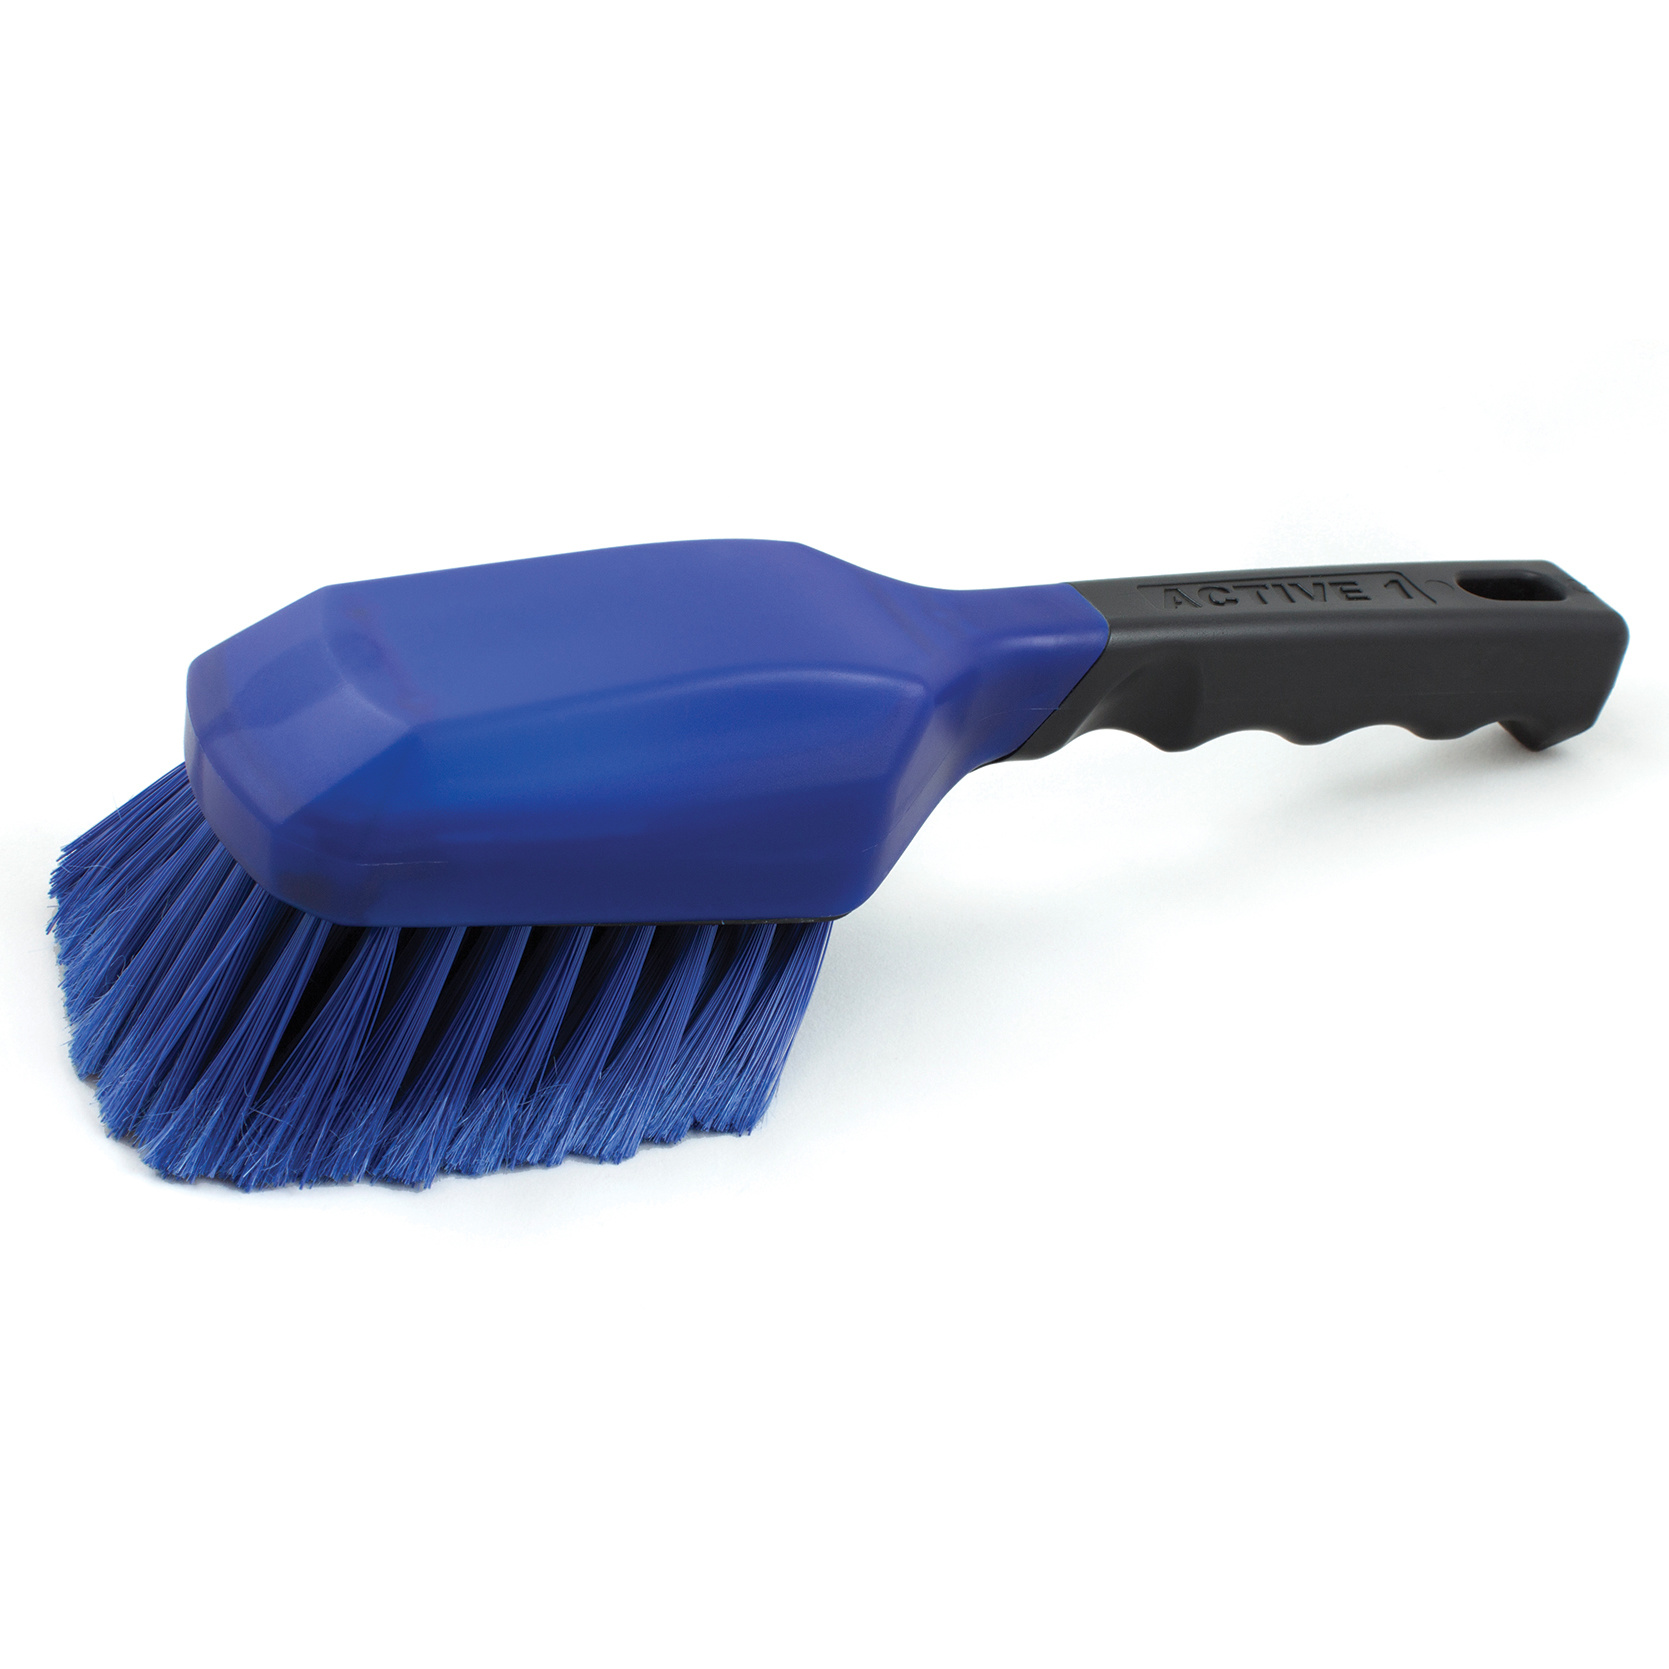 Car Brush with water tank - De Witte